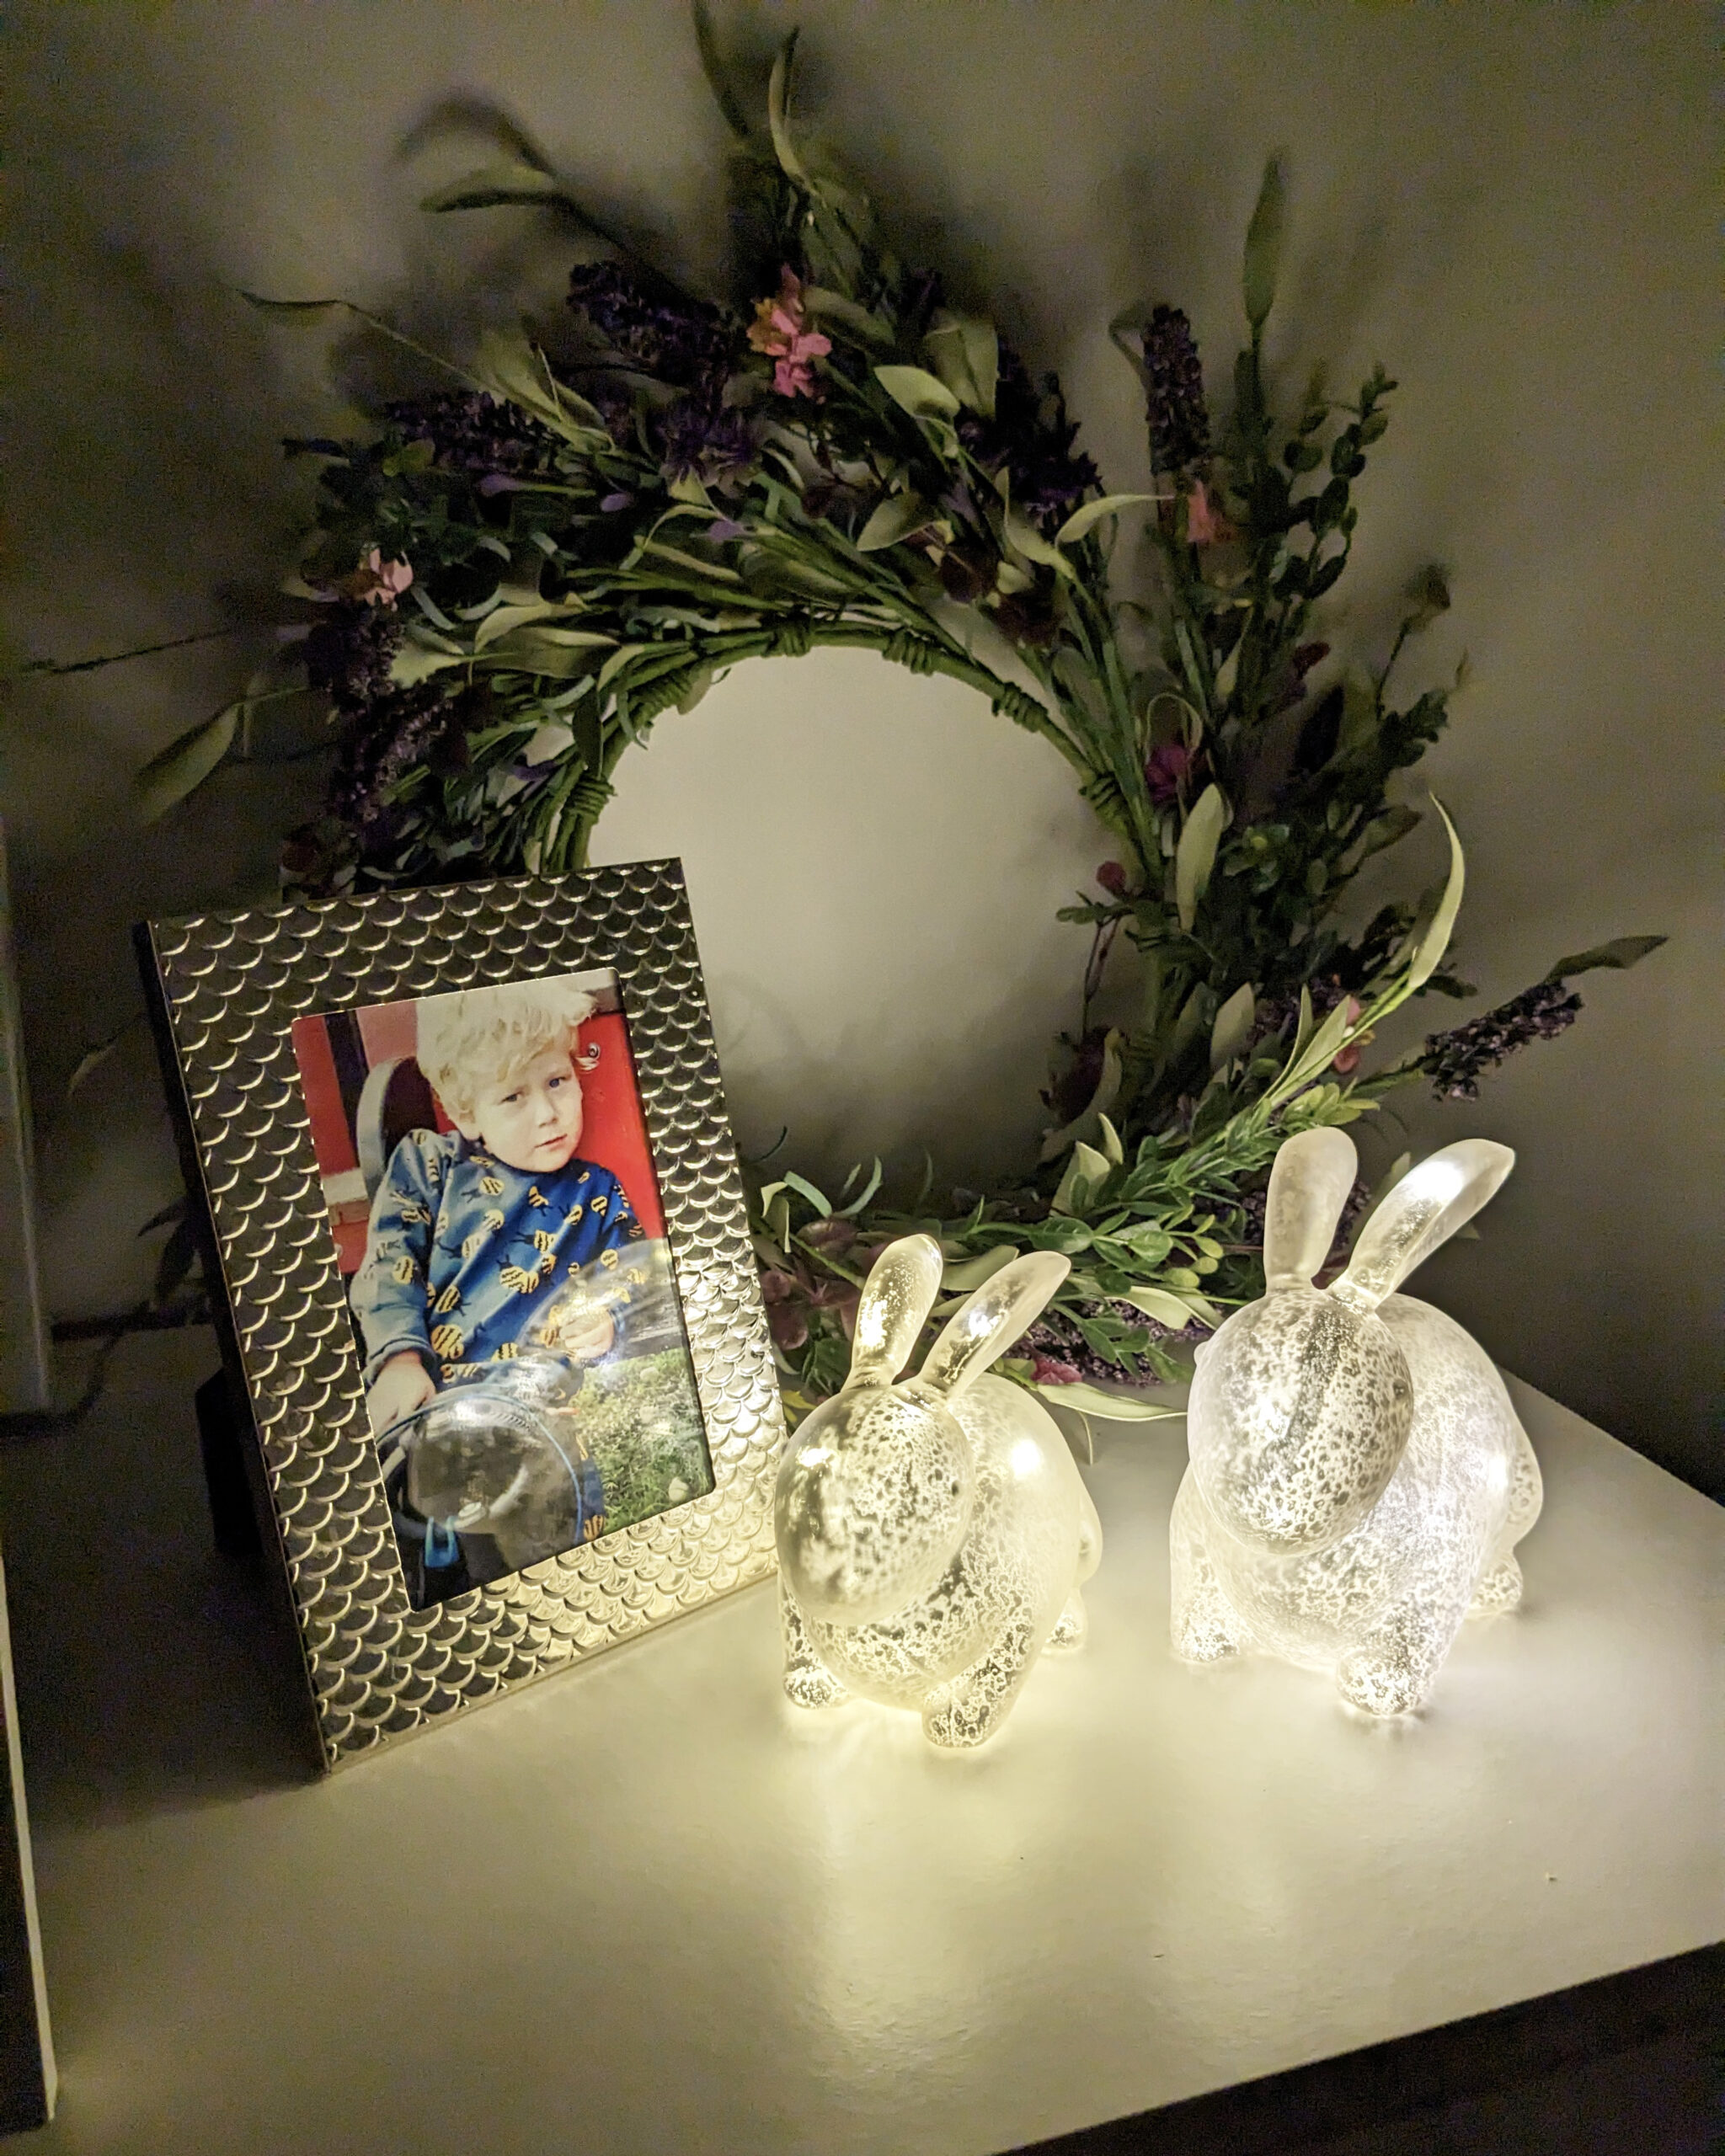 Get Your House Easter Ready, Lights, Lighting Solutions, Home & Interiors, Home, House Project, the Frenchie Mummy, Interiors, Lights4fun, Easter Decorations, Easy Ways To Get Your House Spring Ready